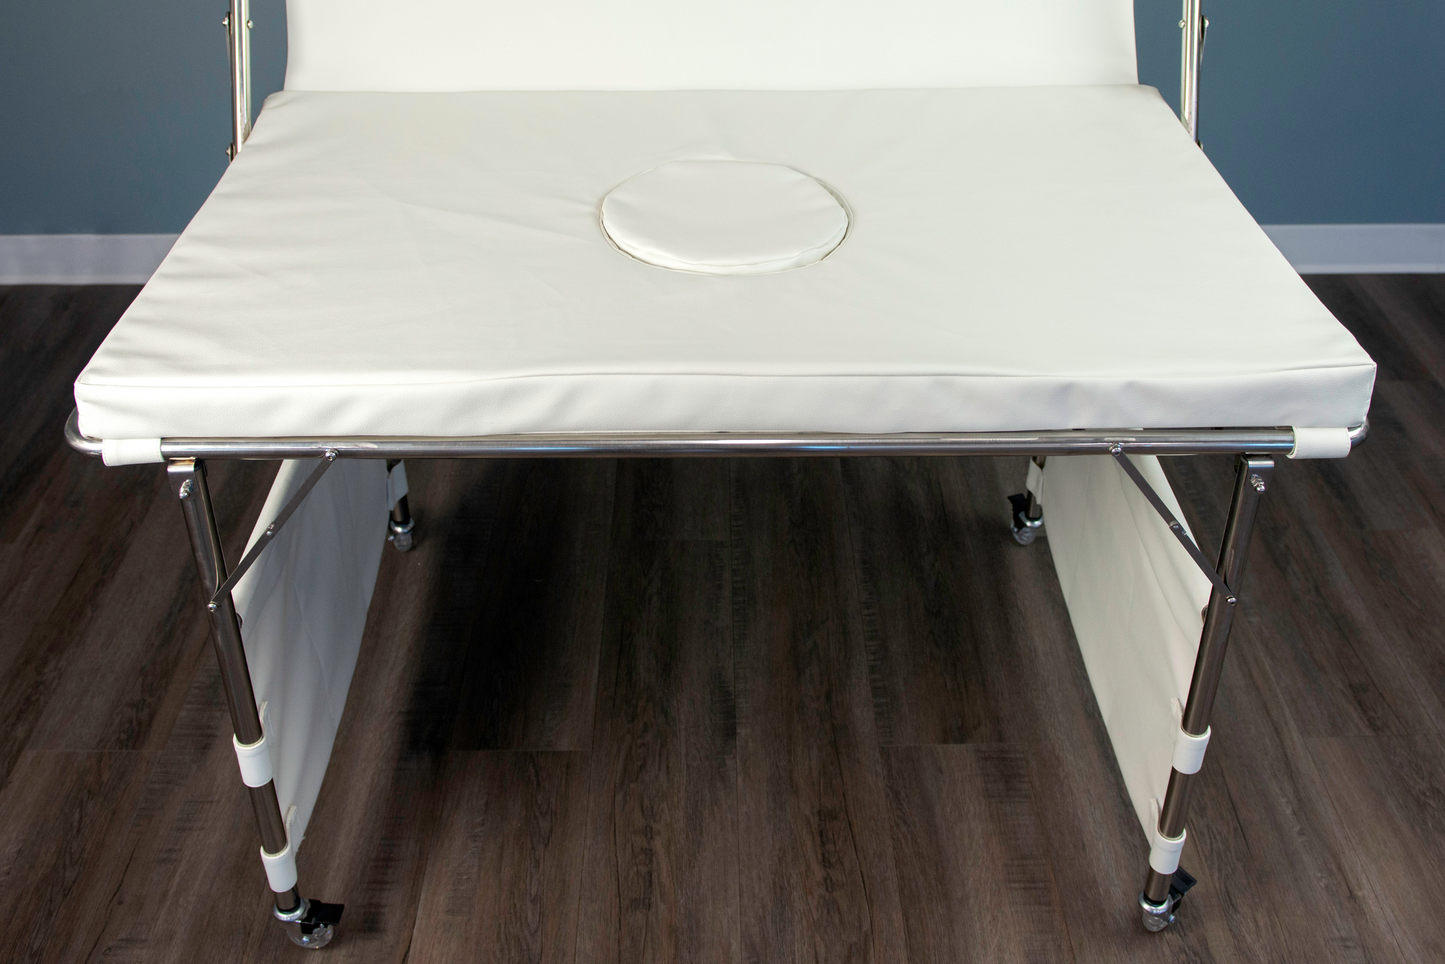 The Easy Table represents an advancement in newborn photography stands, featuring tool-free assembly, a built-in safety bar, and one-click security.